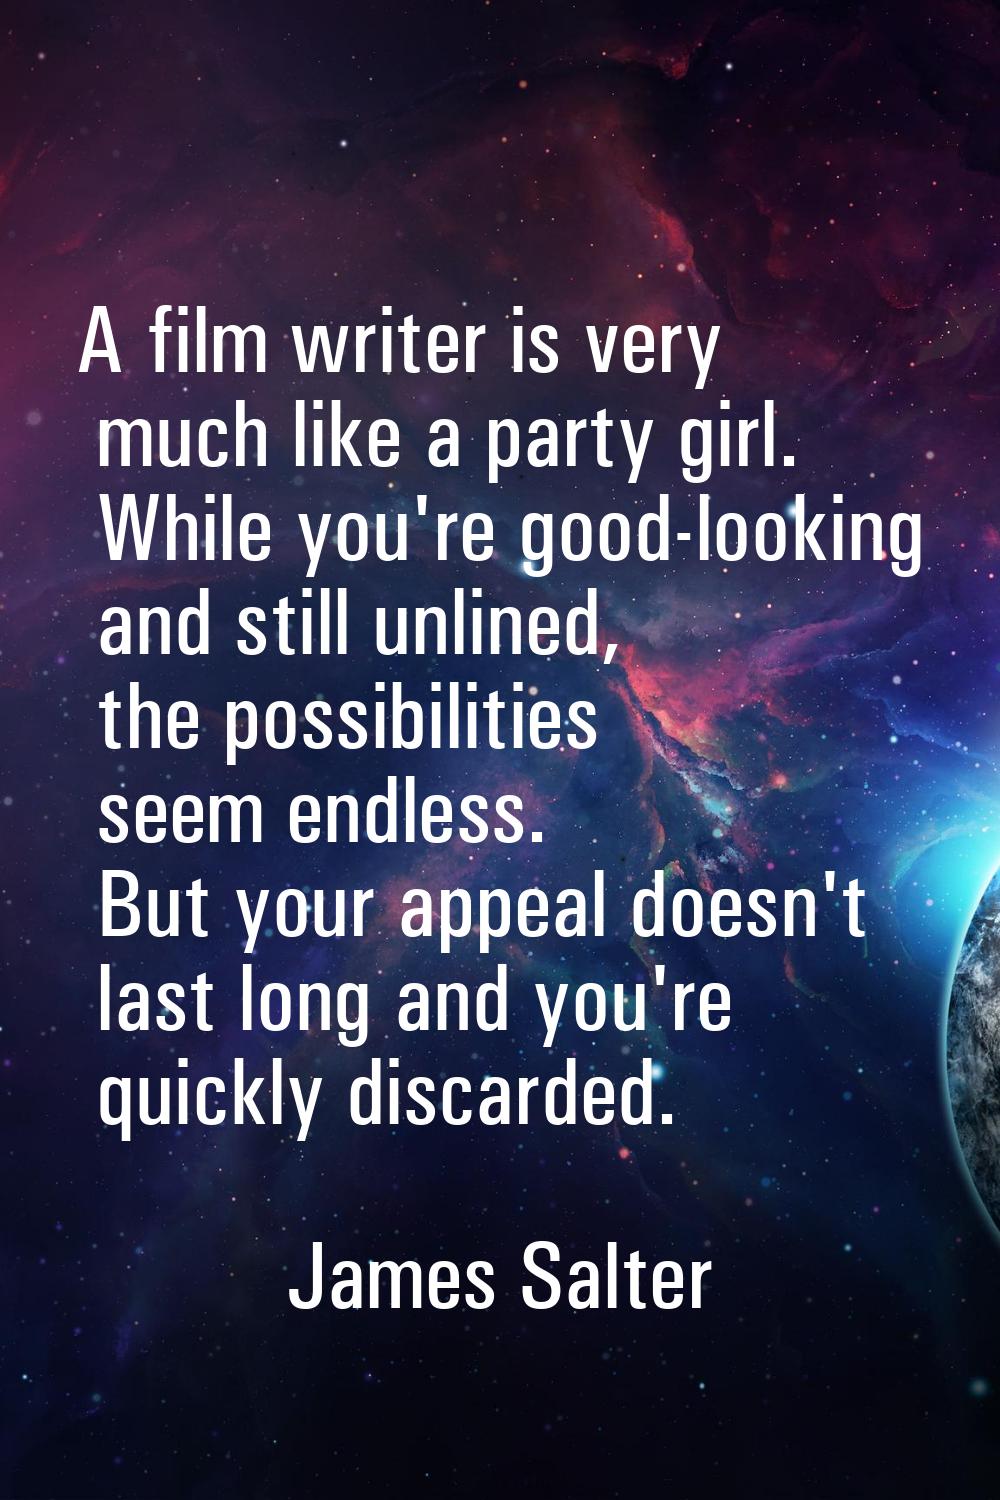 A film writer is very much like a party girl. While you're good-looking and still unlined, the poss